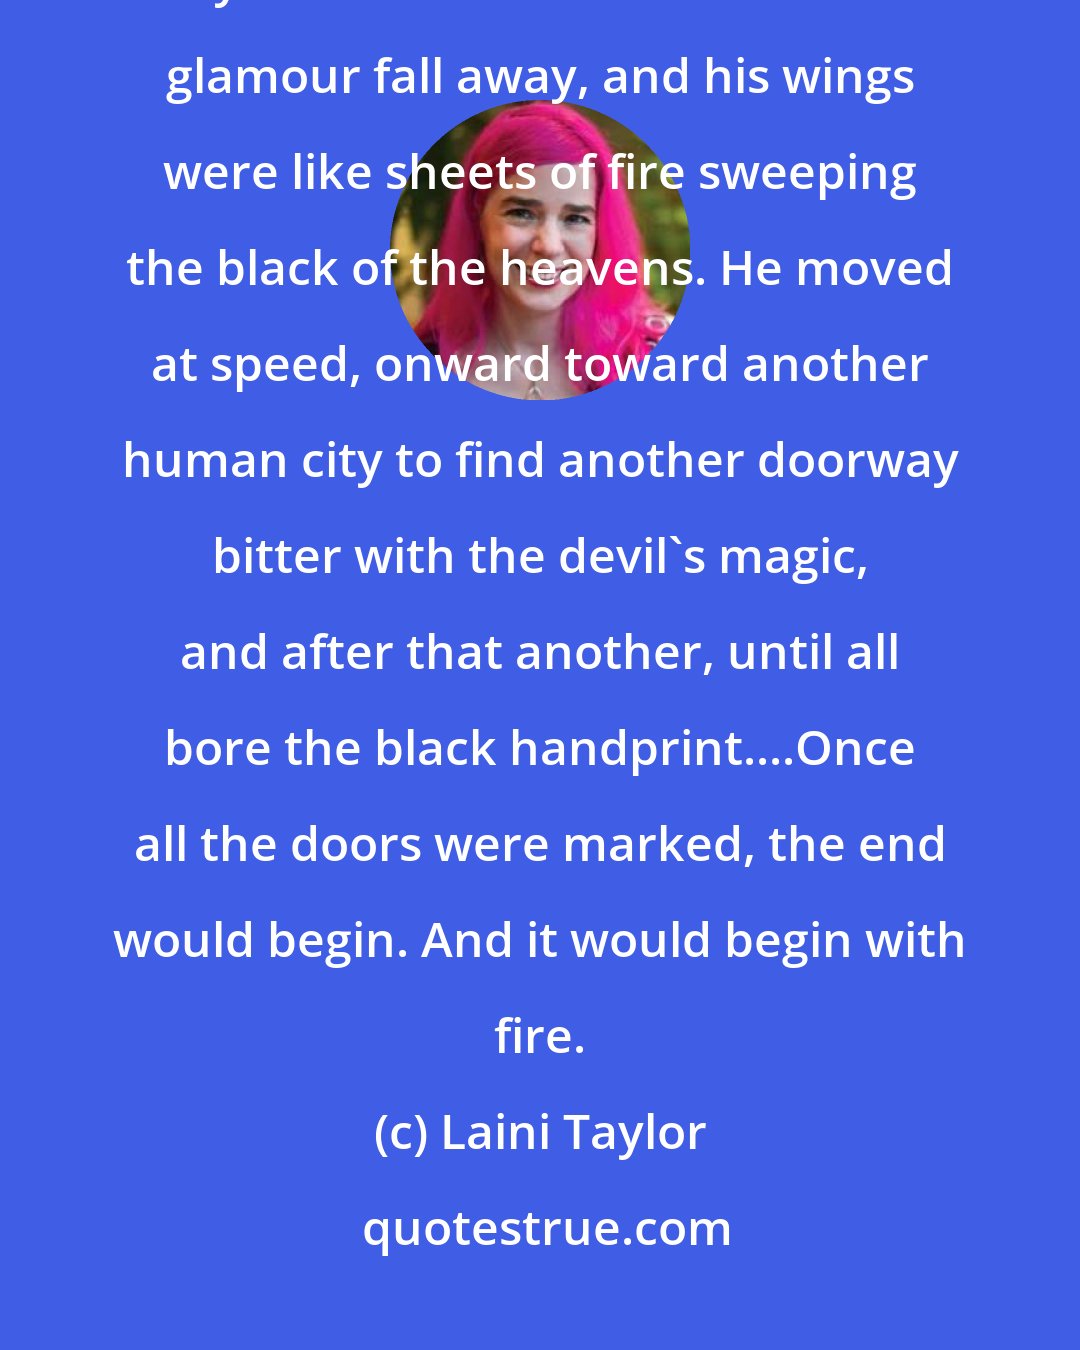 Laini Taylor: In moments Akiva was up in the ether, scarcely feeling the sting of ice crystals in the thin air. He let his glamour fall away, and his wings were like sheets of fire sweeping the black of the heavens. He moved at speed, onward toward another human city to find another doorway bitter with the devil's magic, and after that another, until all bore the black handprint....Once all the doors were marked, the end would begin. And it would begin with fire.